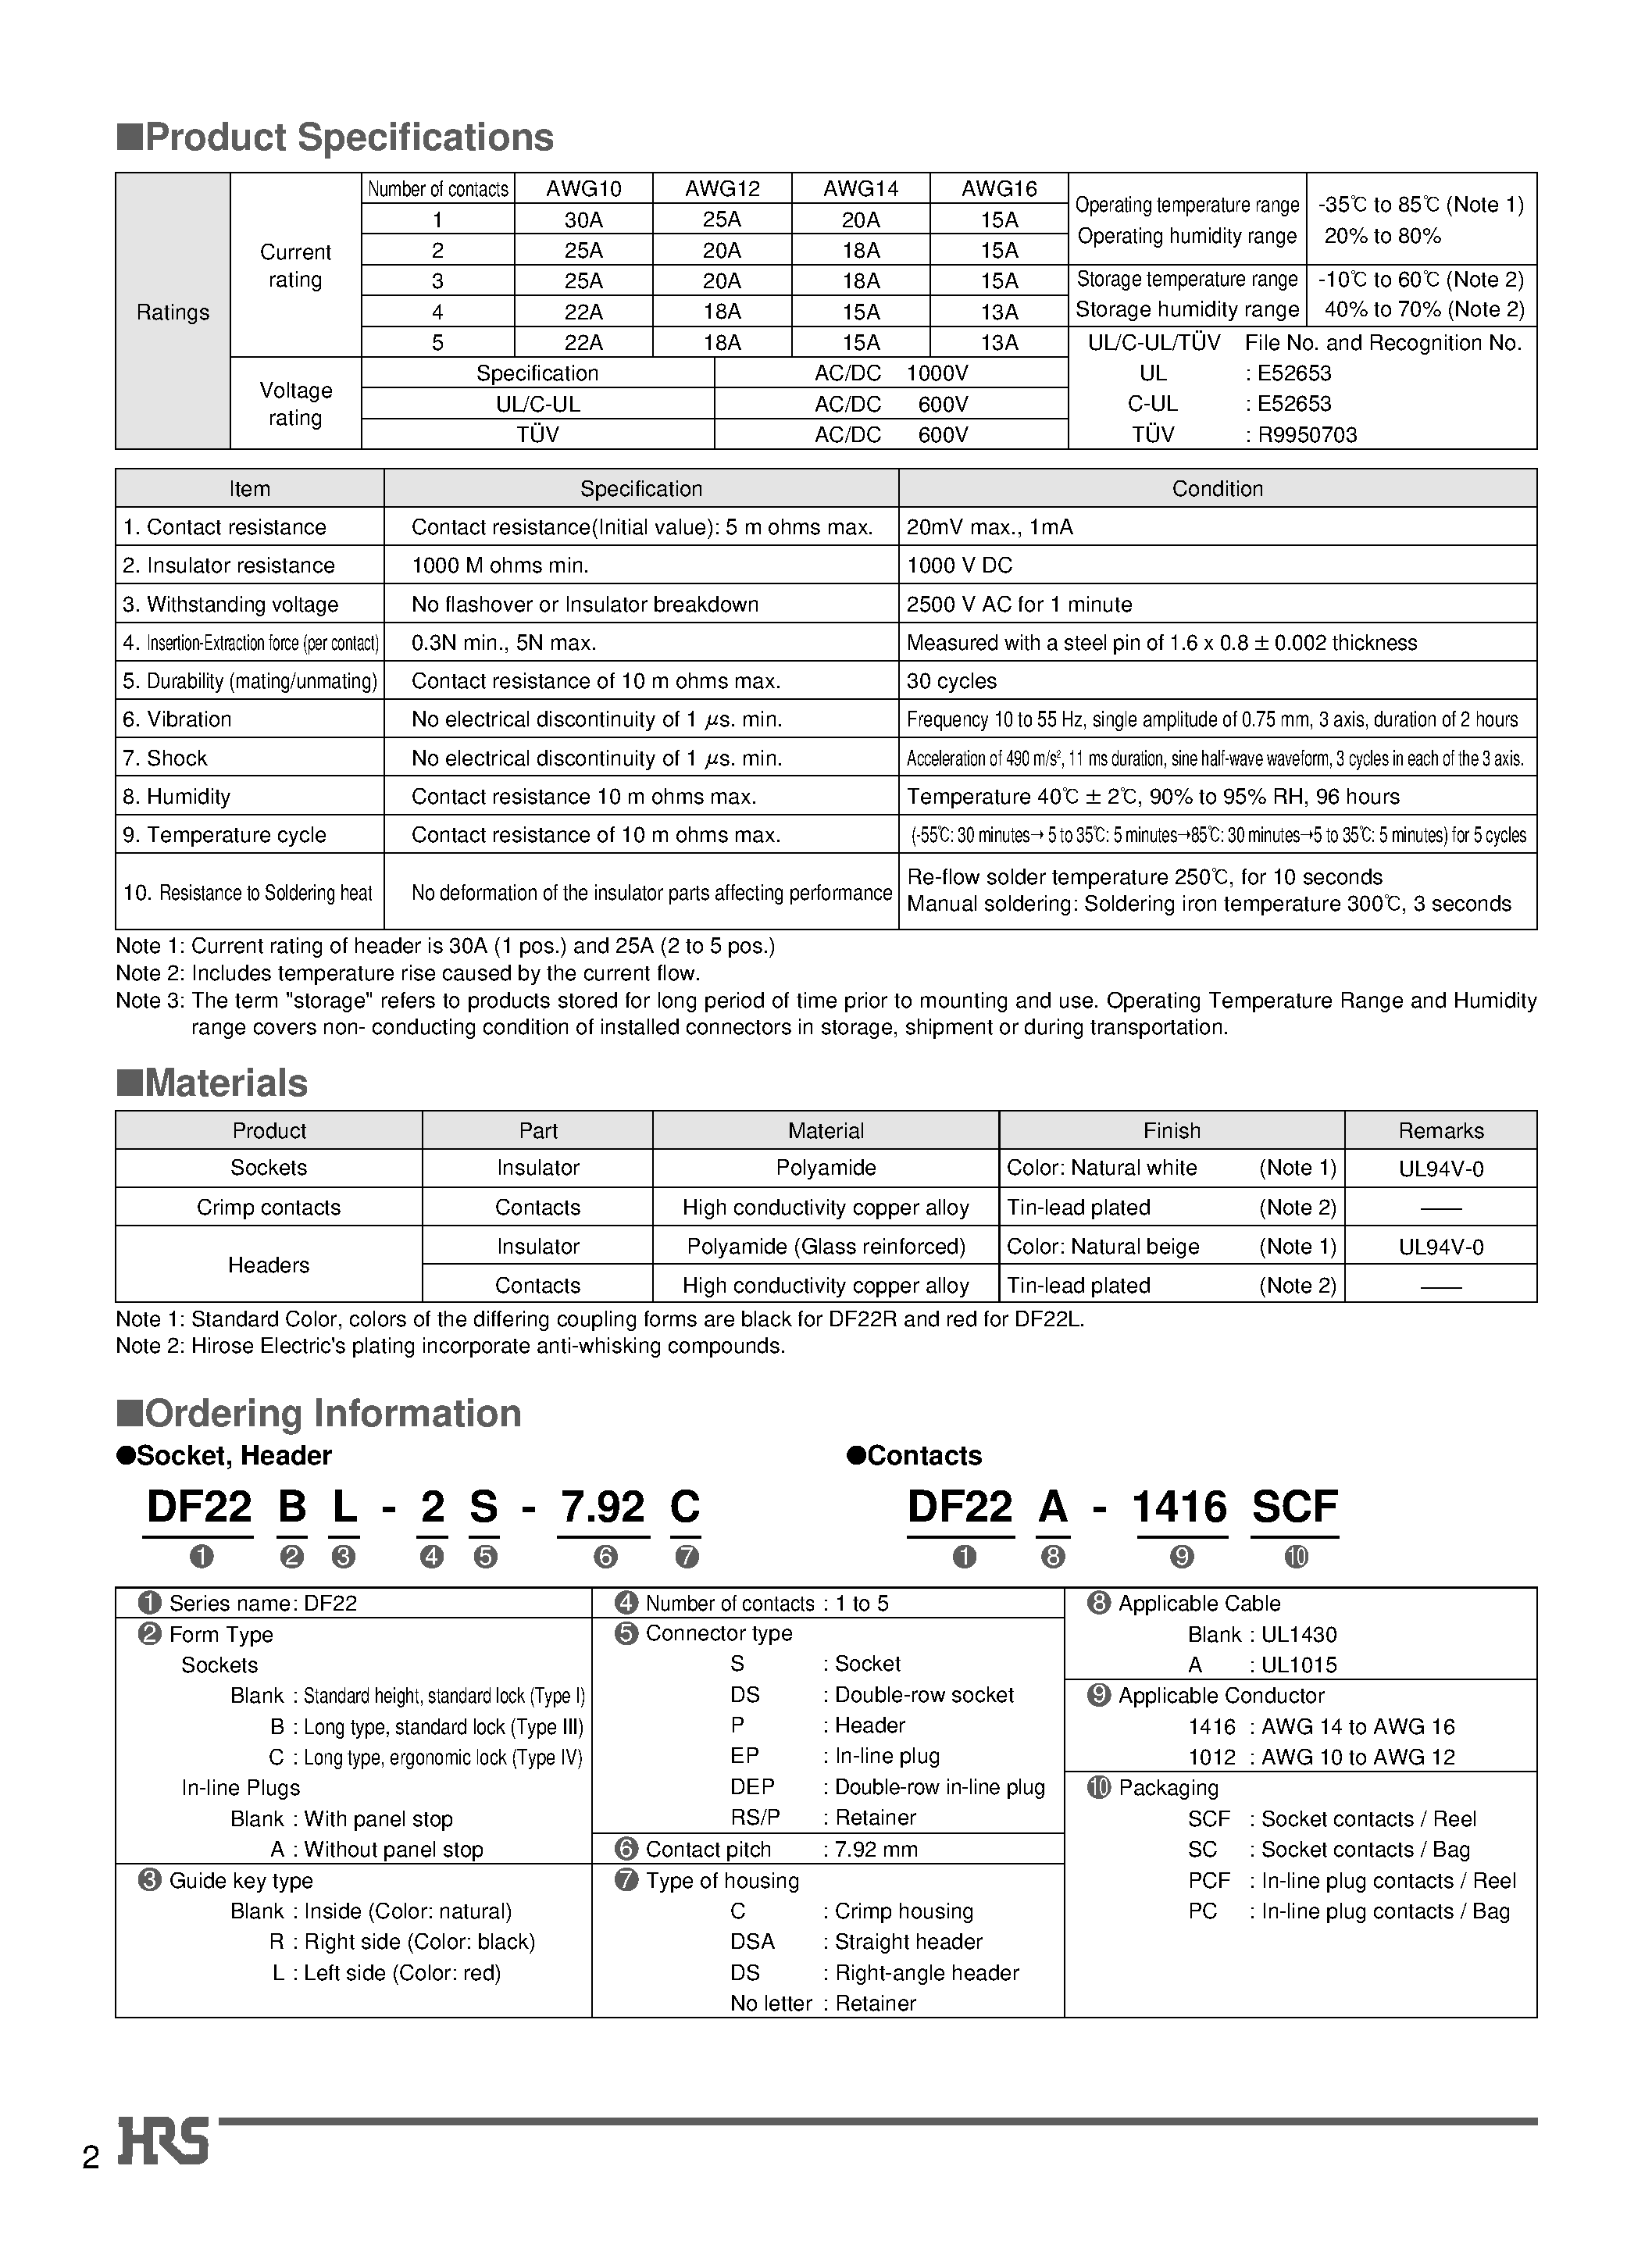 Datasheet DF22-5P-7.92C - 7.92 mm Contact Pitch/ High-Current Connectors for Internal Power Supplies (UL/ C-UL and TUV Listed) page 2